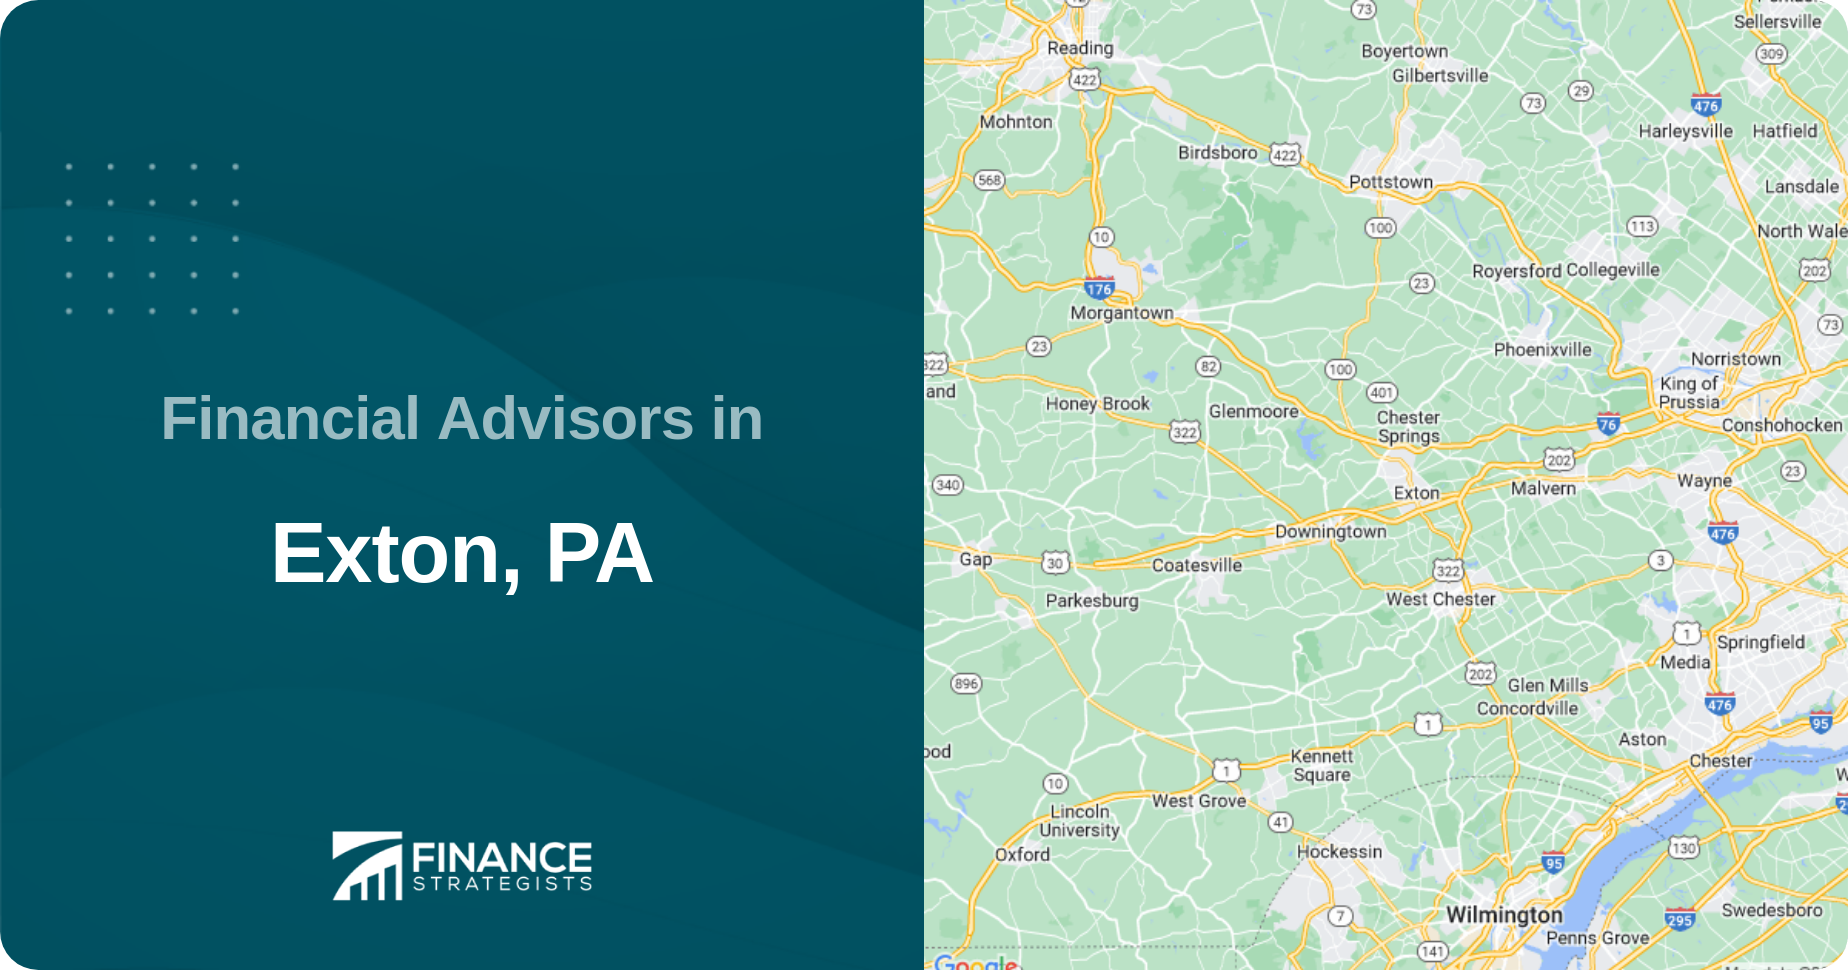 Financial Advisors in Exton, PA